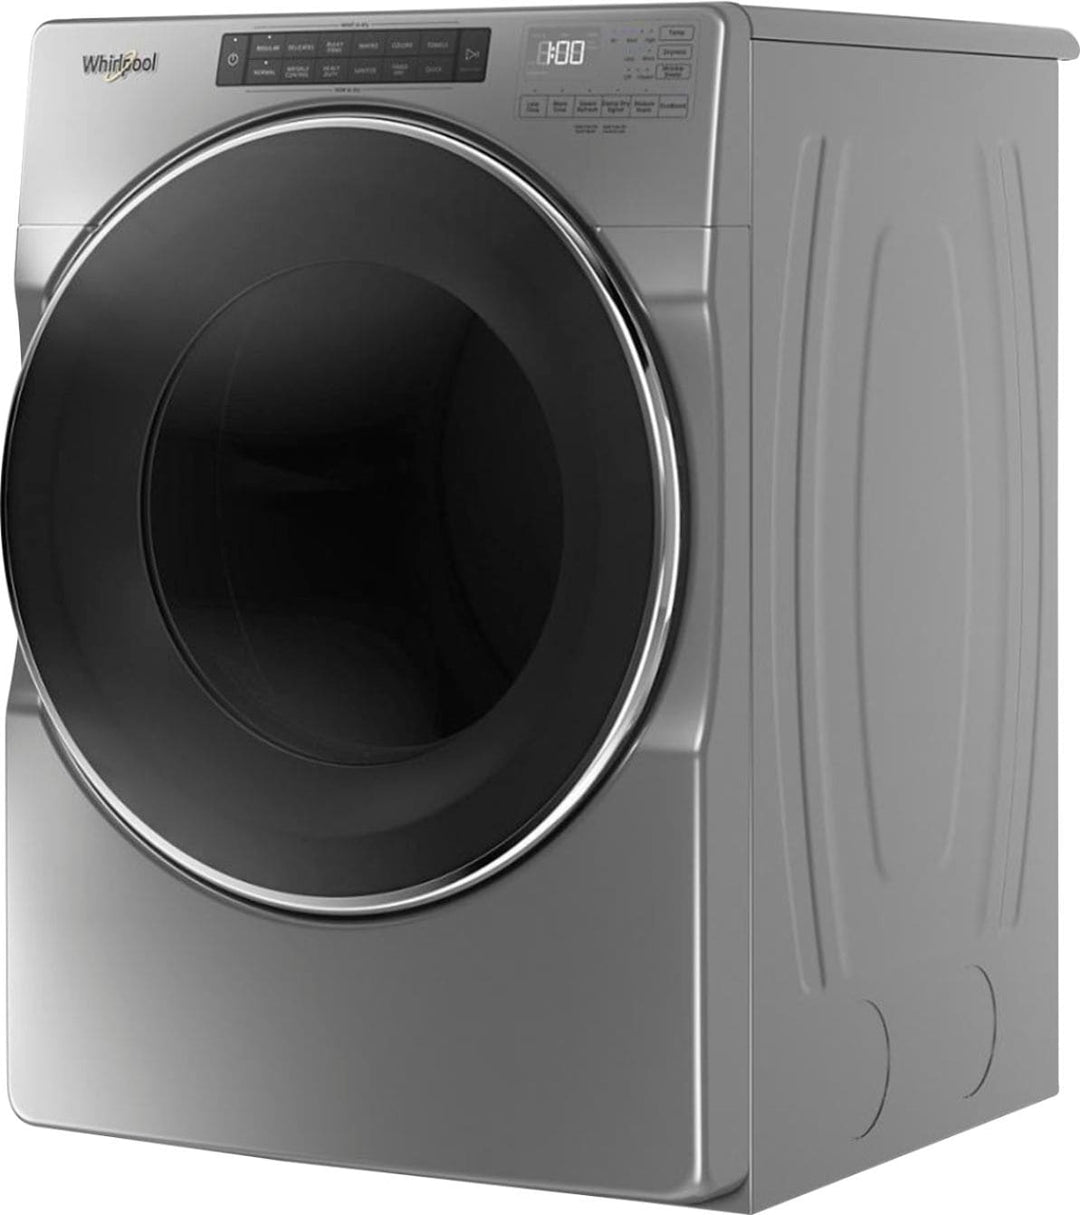 Whirlpool - 7.4 Cu. Ft. Stackable Electric Dryer with Steam and Wrinkle Shield Plus Option - Chrome shadow_9